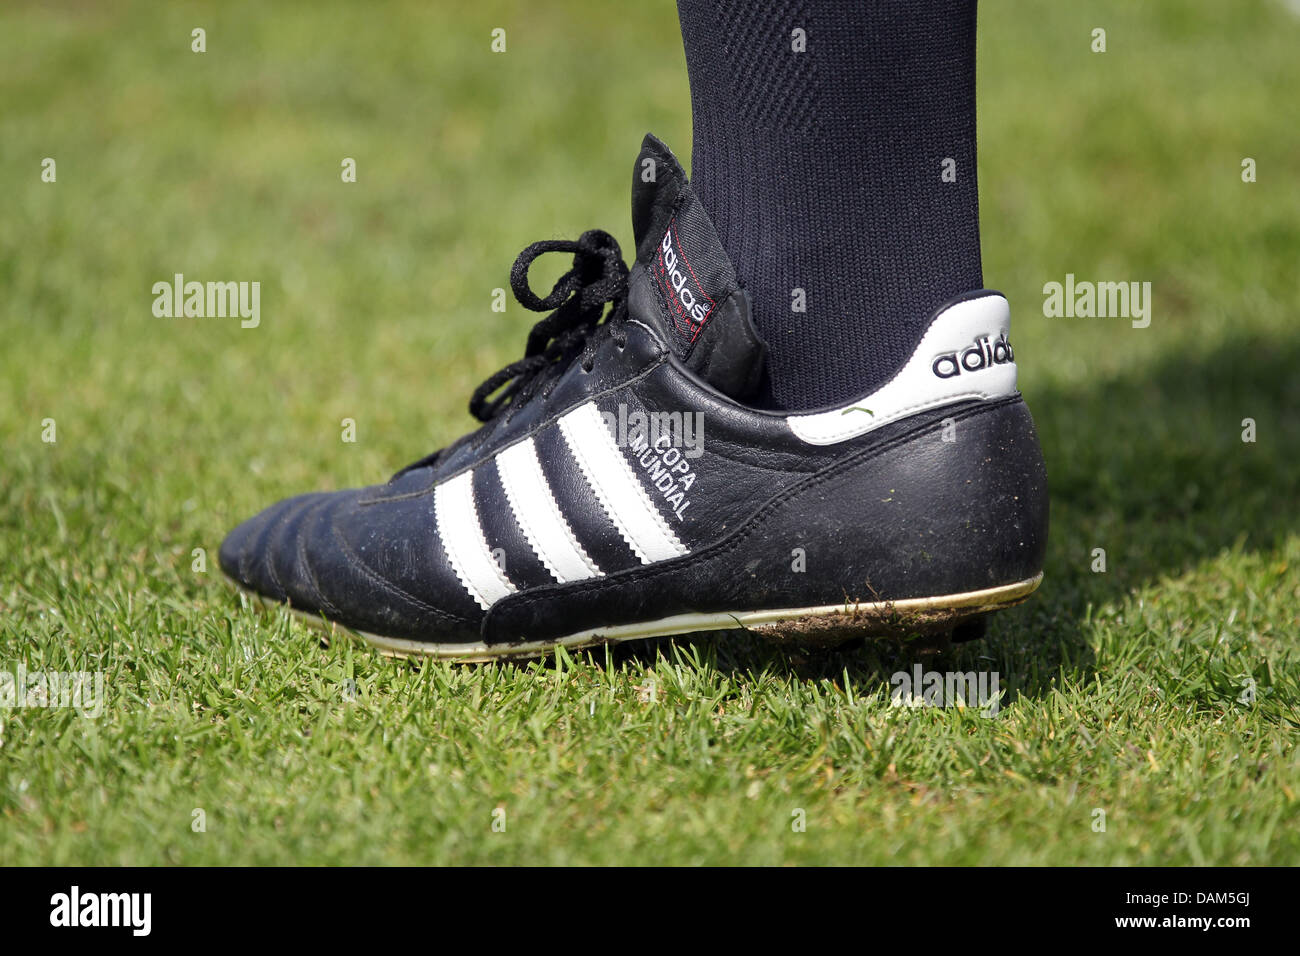 A linesman wearing a soccer shoe model 'Copa Mundial' made by sports wear manufacturer adidas stands on the pitch during the second division Bundesliga soccer match between SpVgg Greuther Fuerth and Fortuna Duesseldorf at the Trolli Arena in Fuerth, Germany, 15 May 2011. Photo: Daniel Karmann Stock Photo